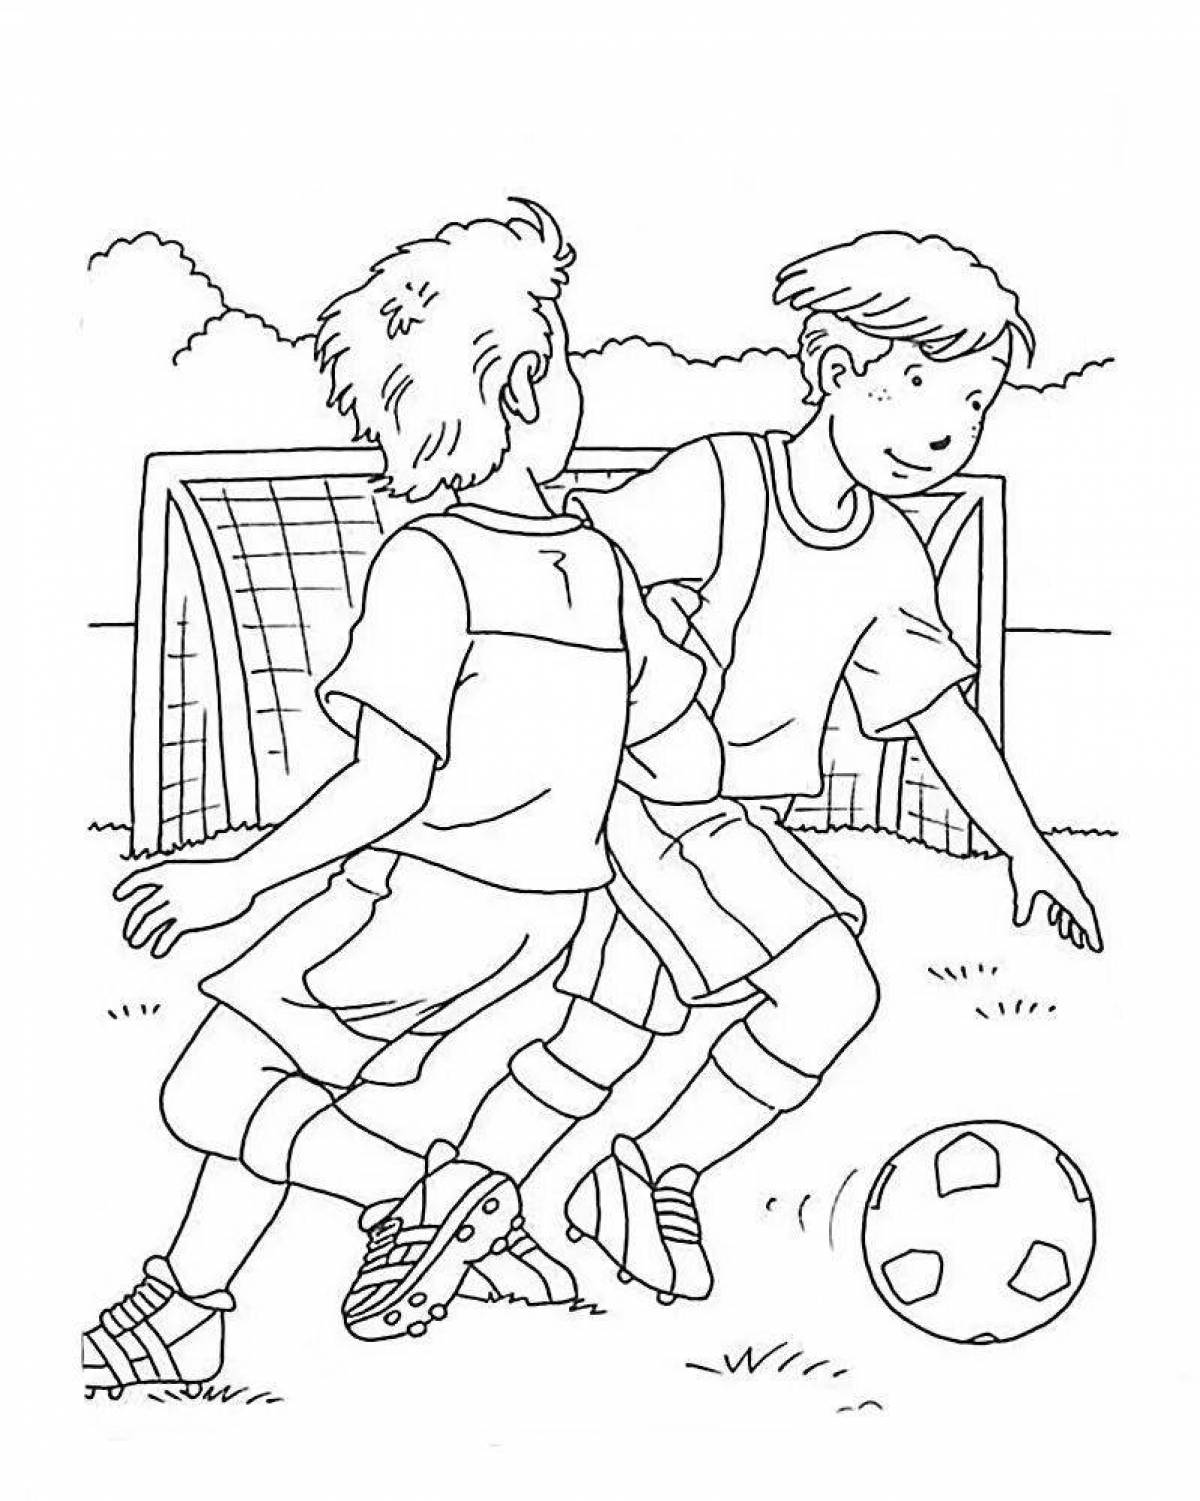 Animated boy playing football coloring book